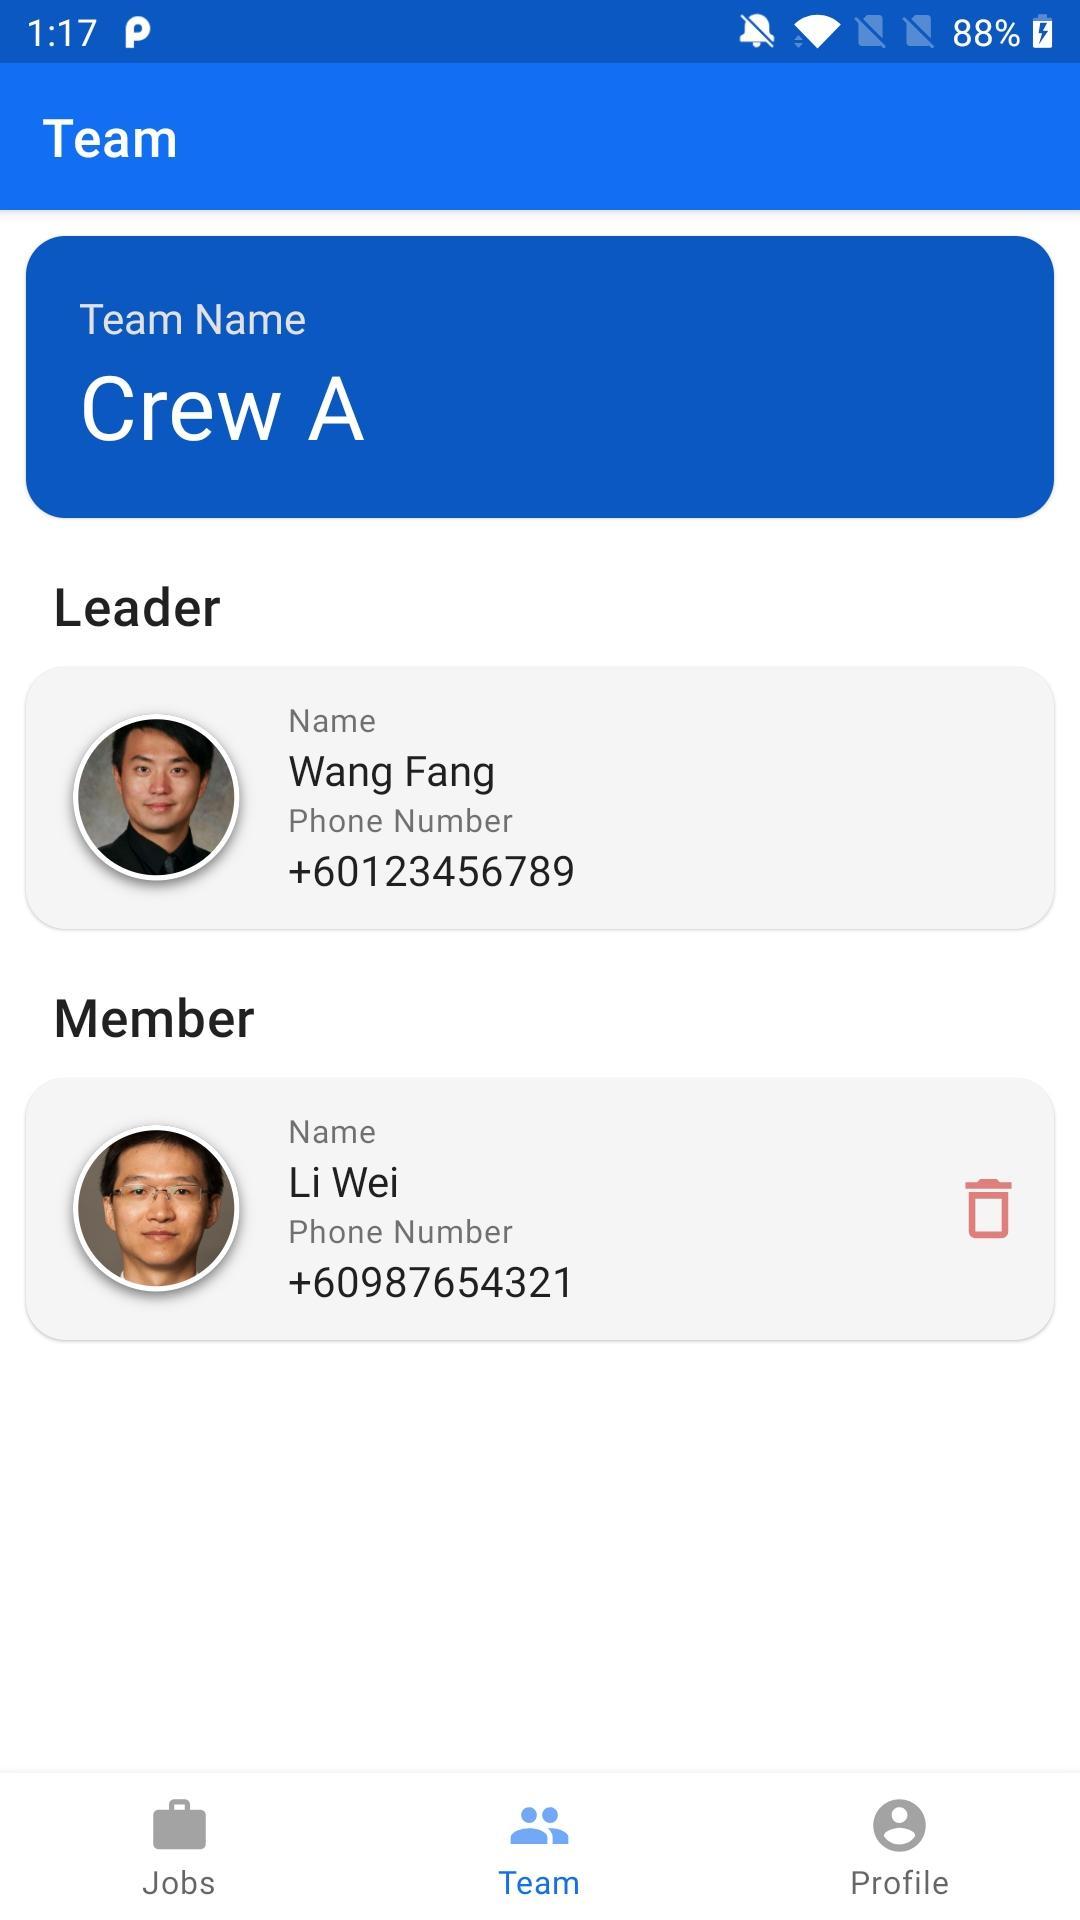 ANG Family Home Services - Crew 1.0.6 Screenshot 11